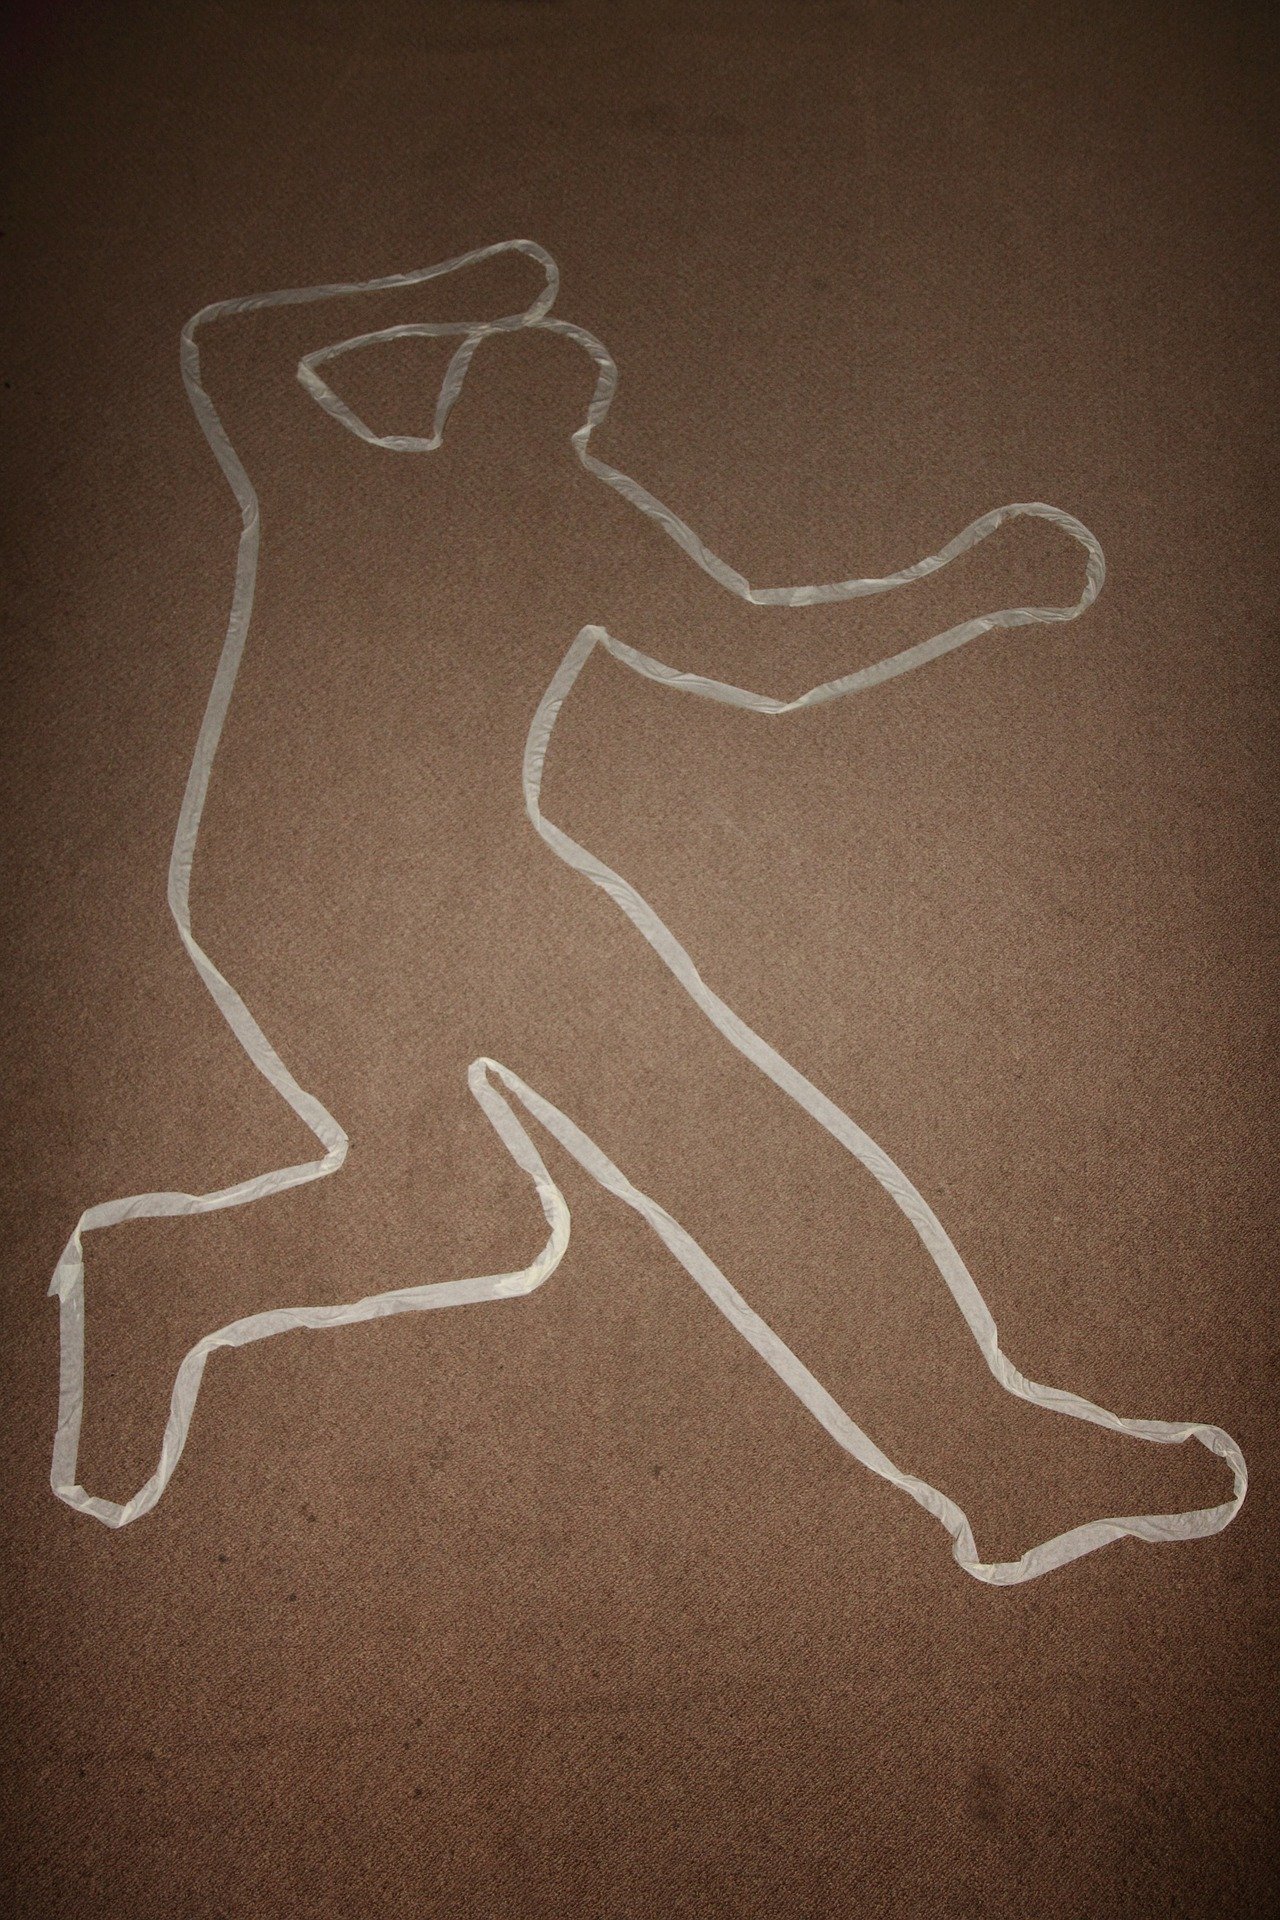 A photo depicting a body at a crime scene | Source: Pixabay